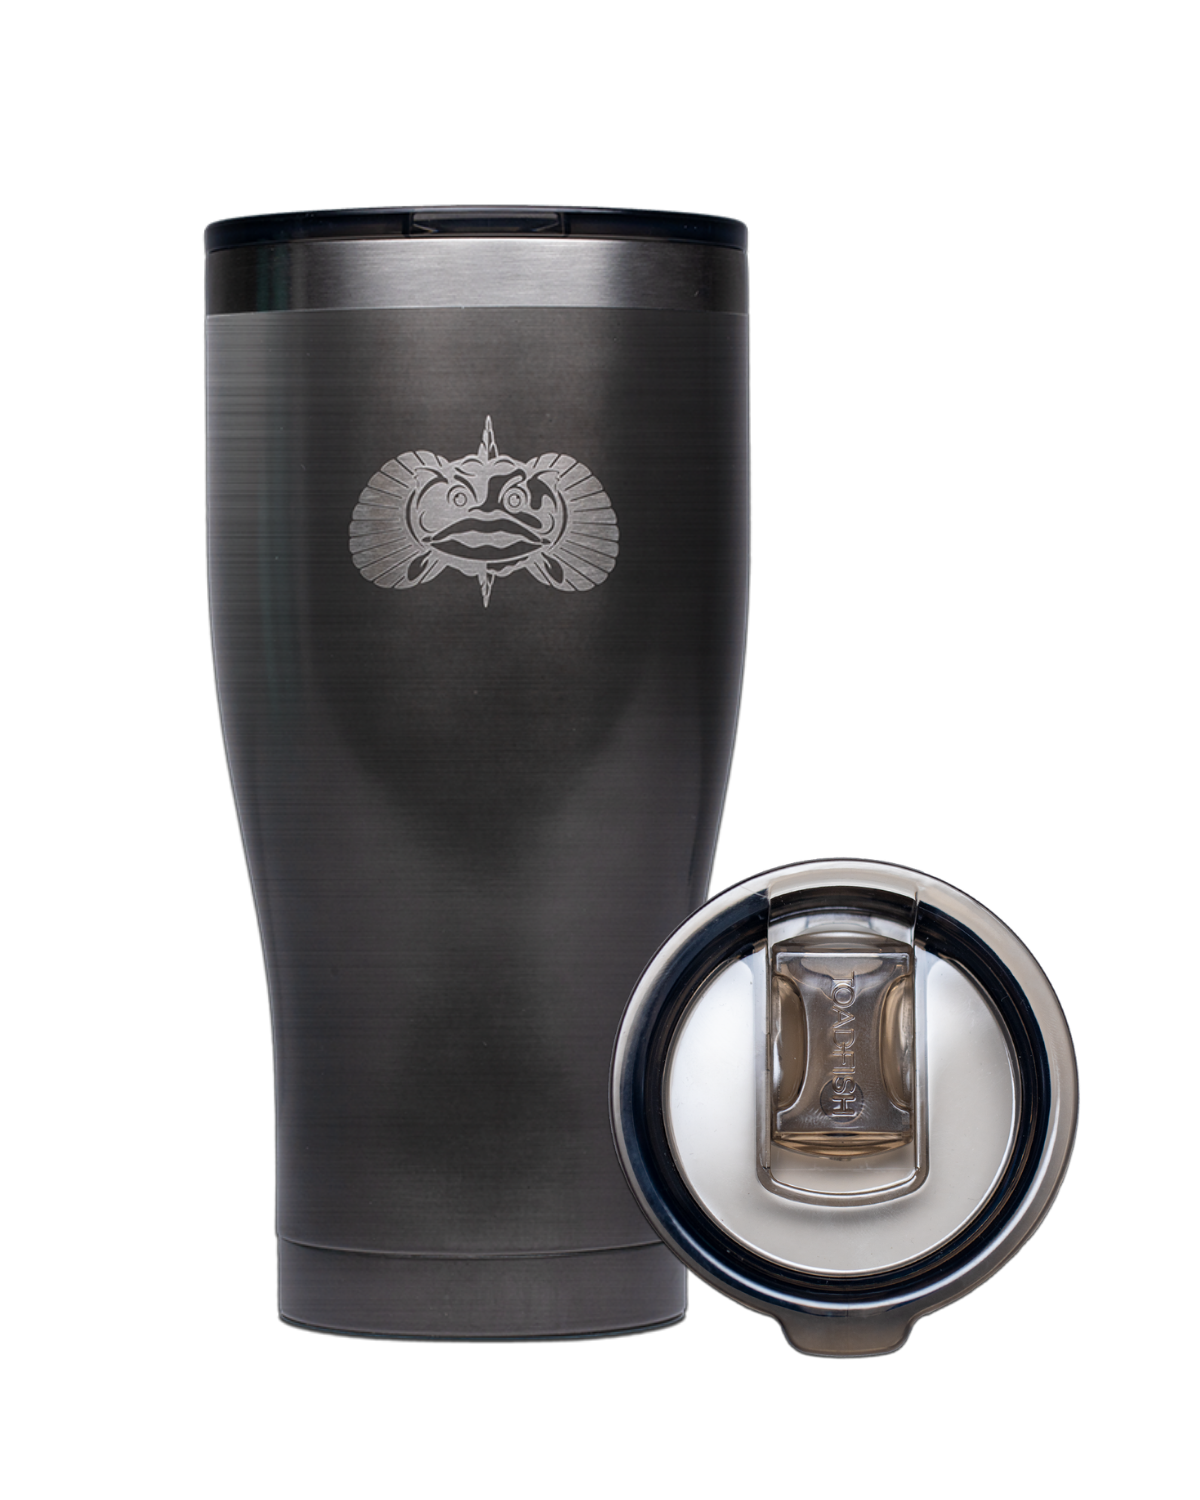 TOADFISH Toadfish Insulated Stainless Steel 20oz Tumbler & Lid